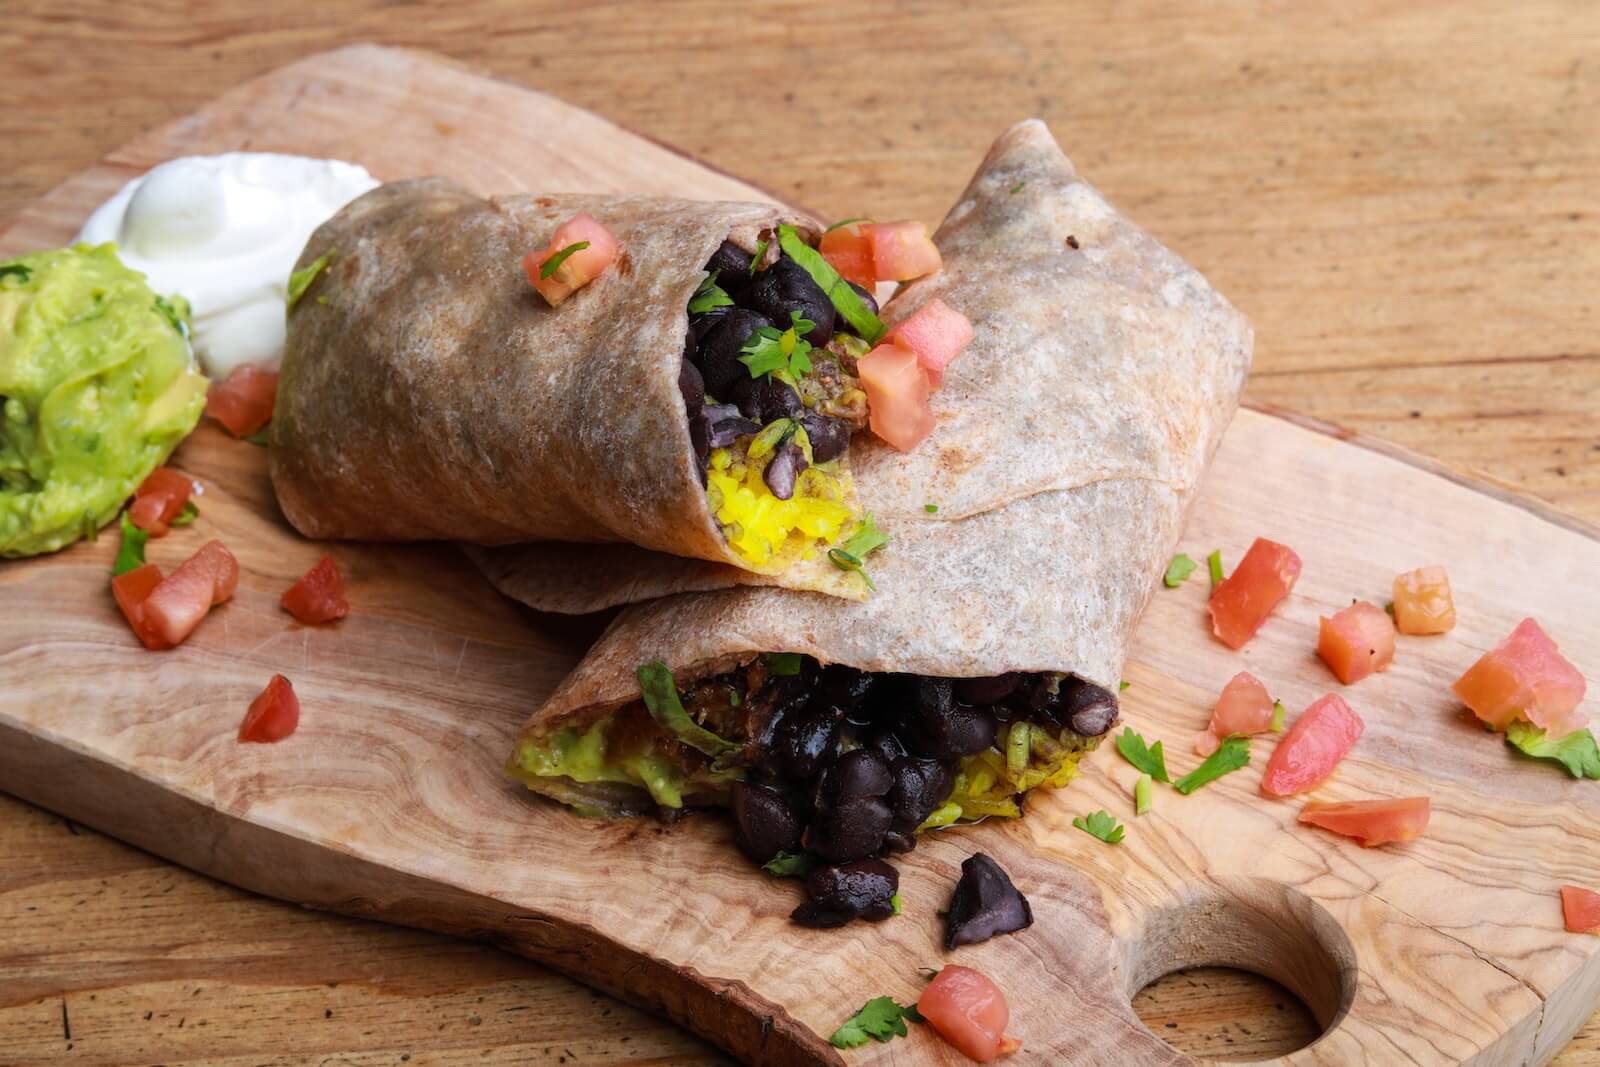 Someone made edible Tastee Tape that holds your burrito closed while you  eat it